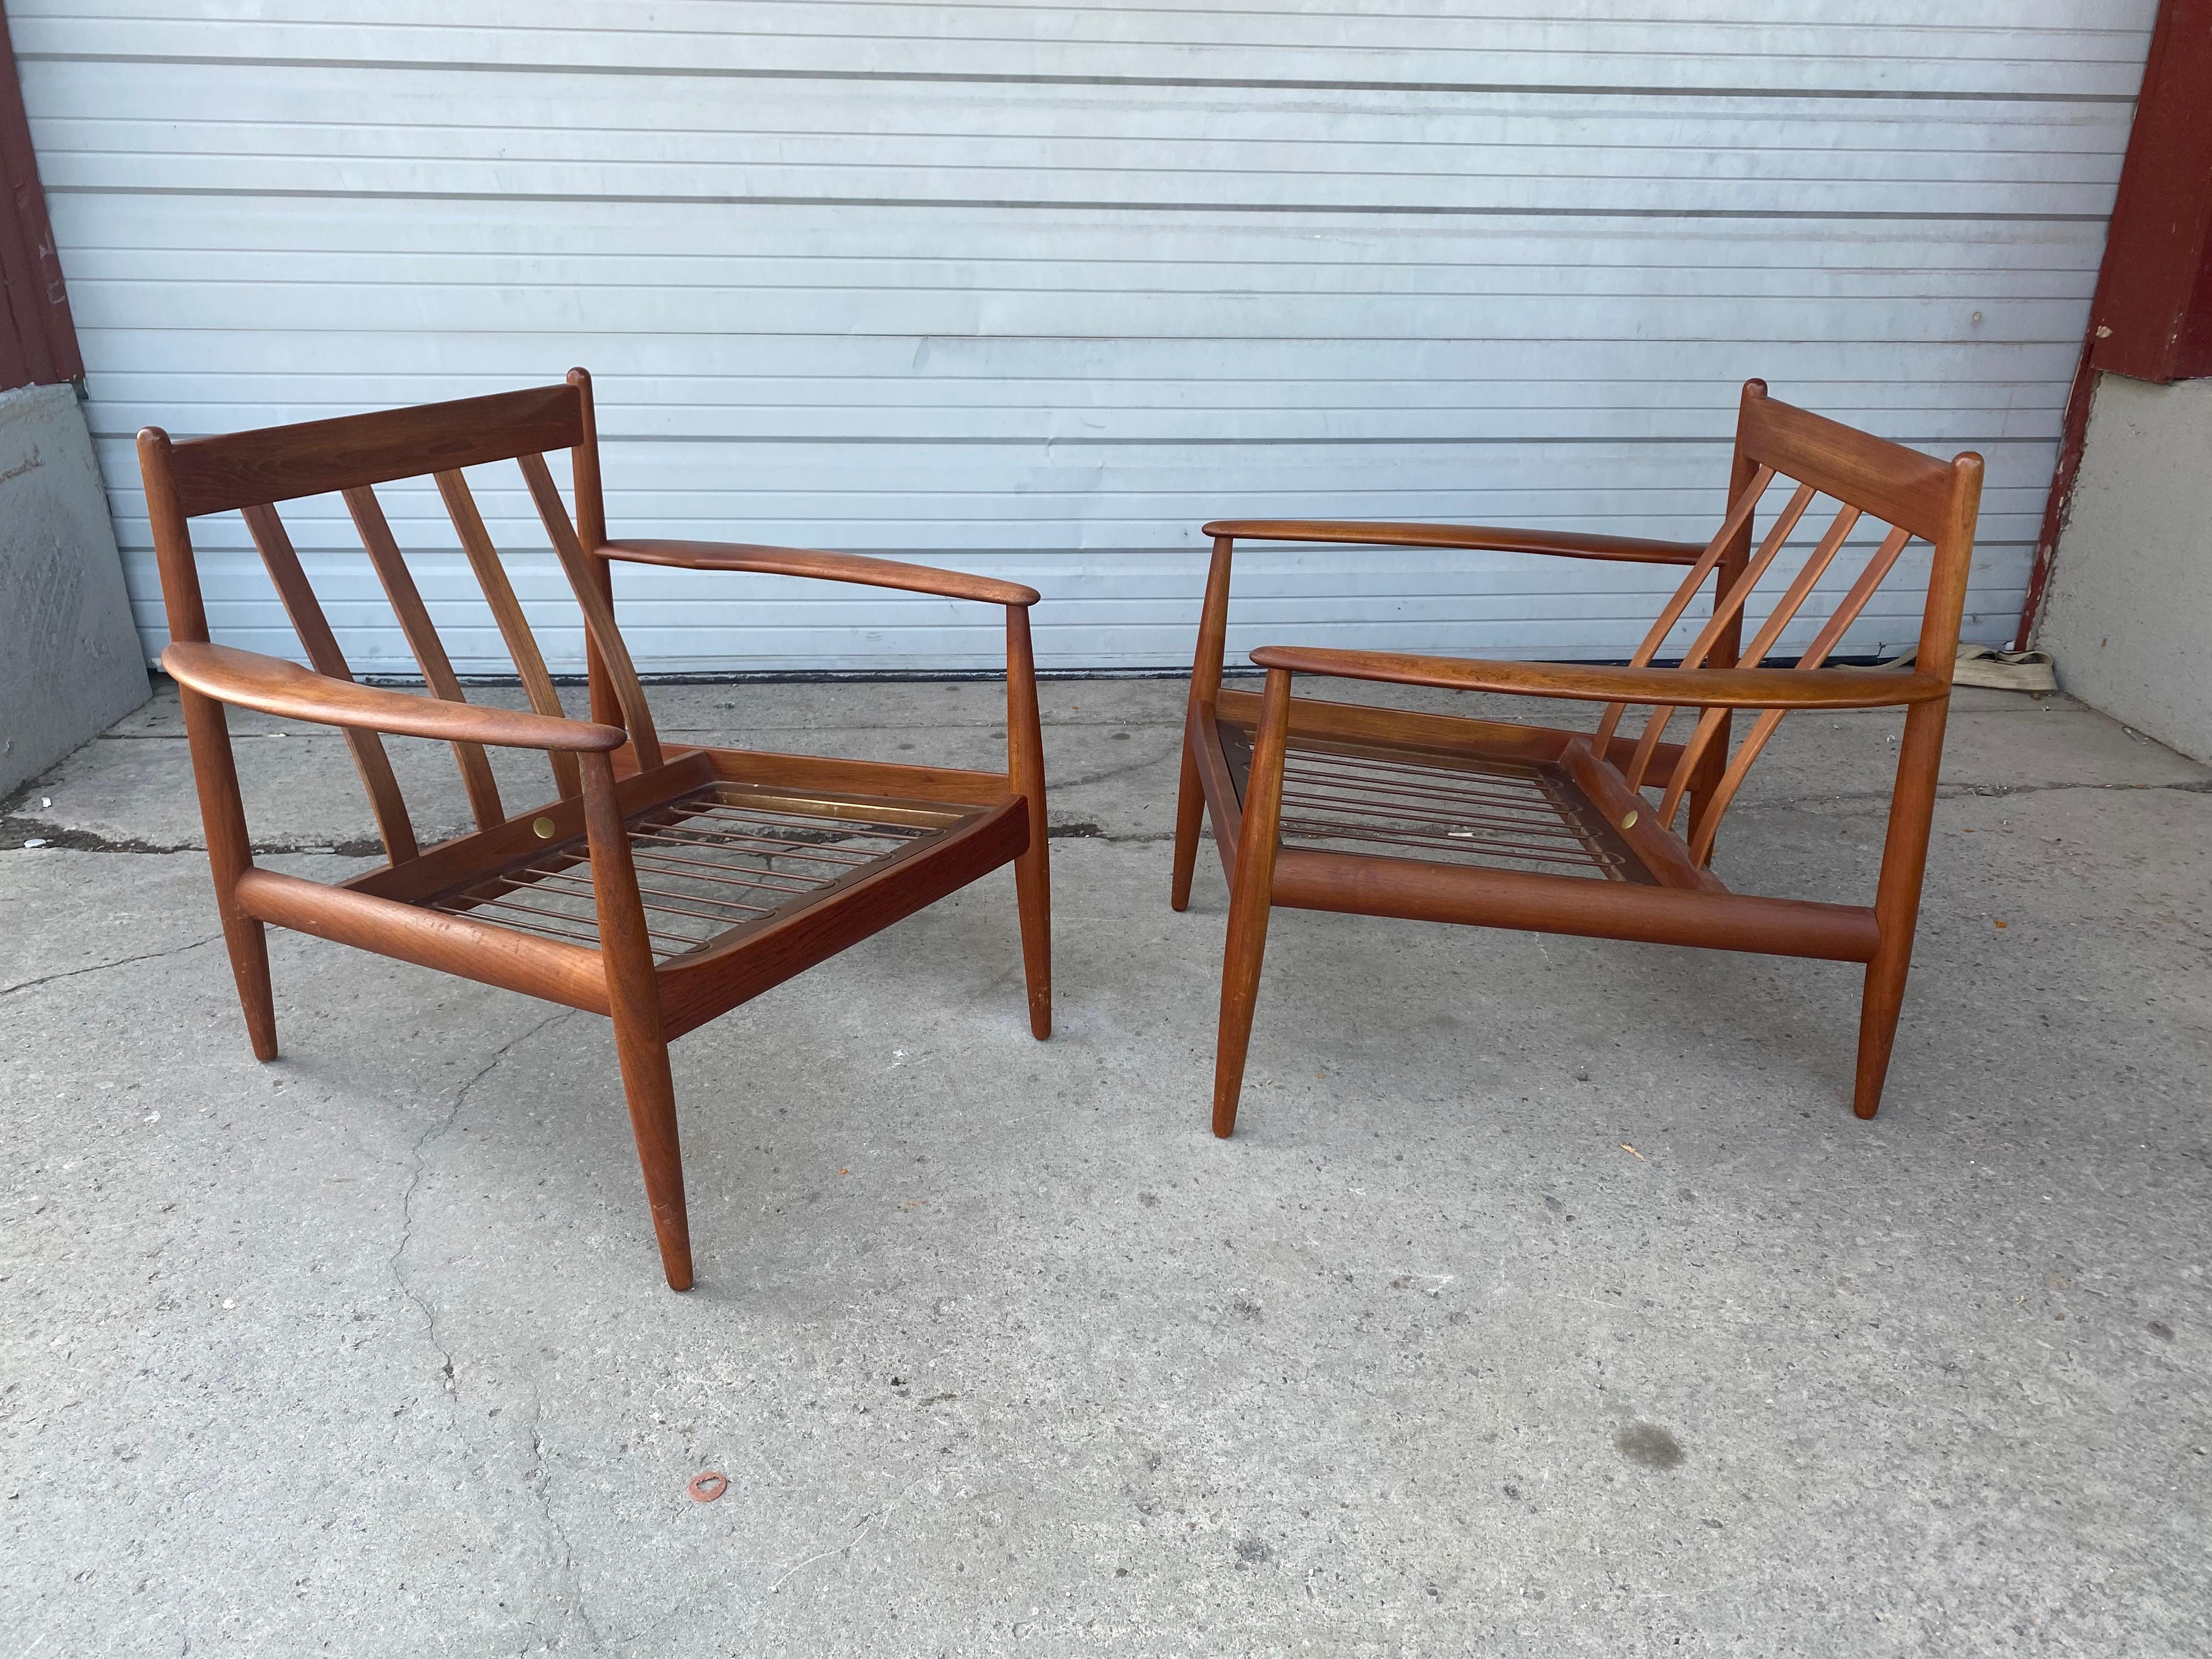 These are early and rare lounge chairs designed by Grete Jalk manufactured by France & sons..Solid Teak construction,,This pair includes original spring cushions.Superior quality and construction..Extremely comfortable,, Retains original early metal